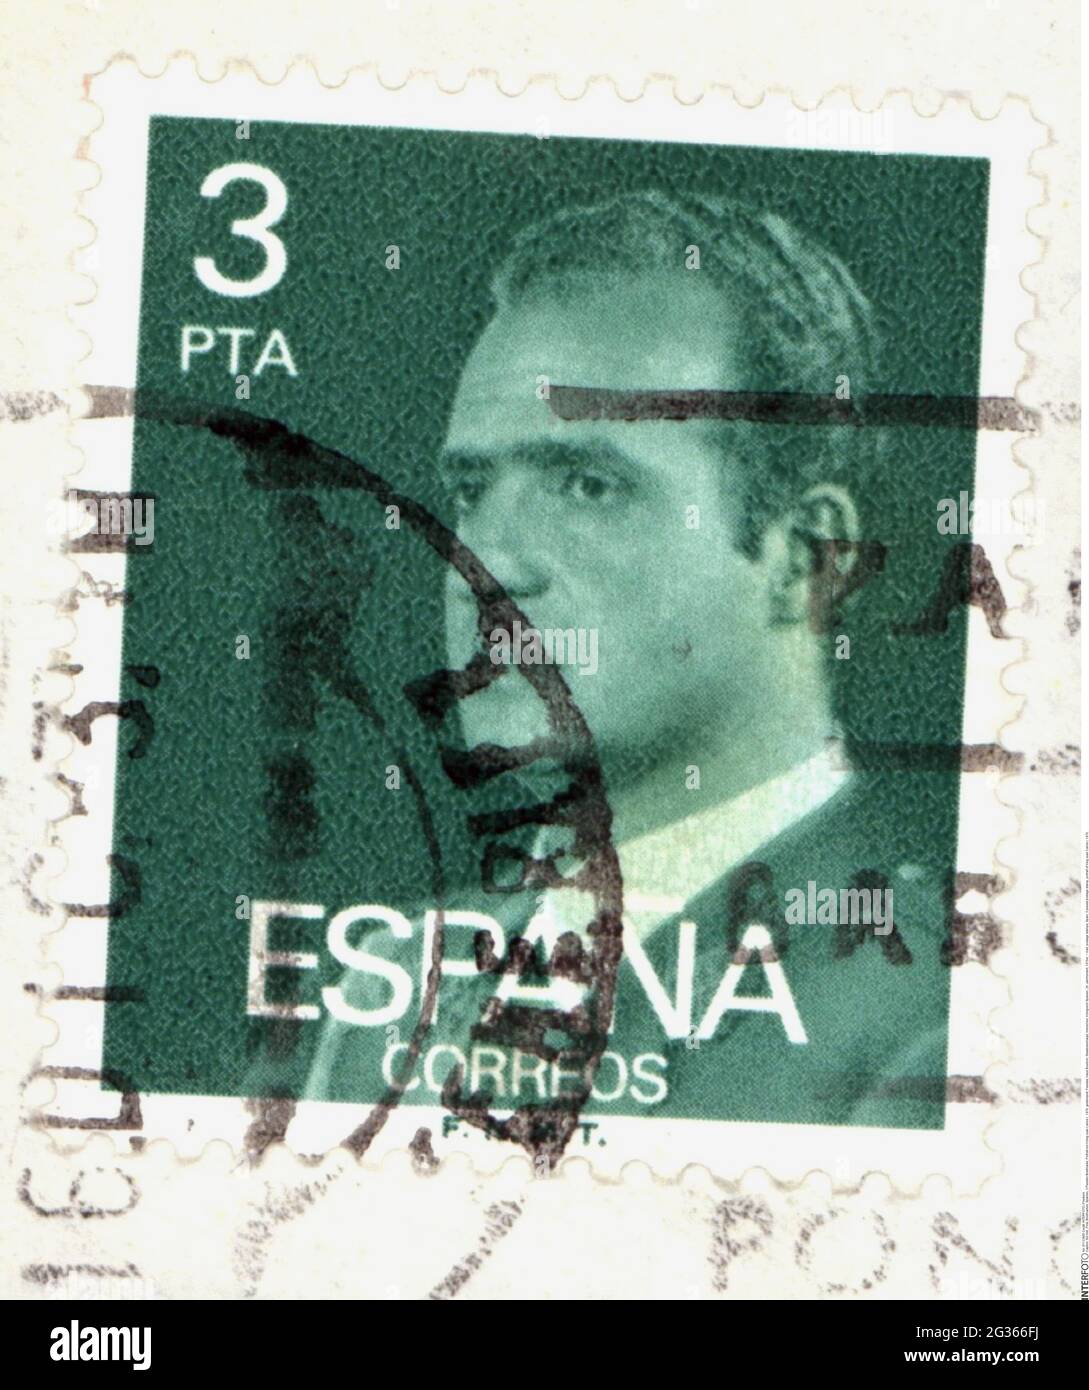 mail, postage stamps, Spain, 3 peseta postage stamp, portrait of King Juan Carlos I, 1976, ADDITIONAL-RIGHTS-CLEARANCE-INFO-NOT-AVAILABLE Stock Photo